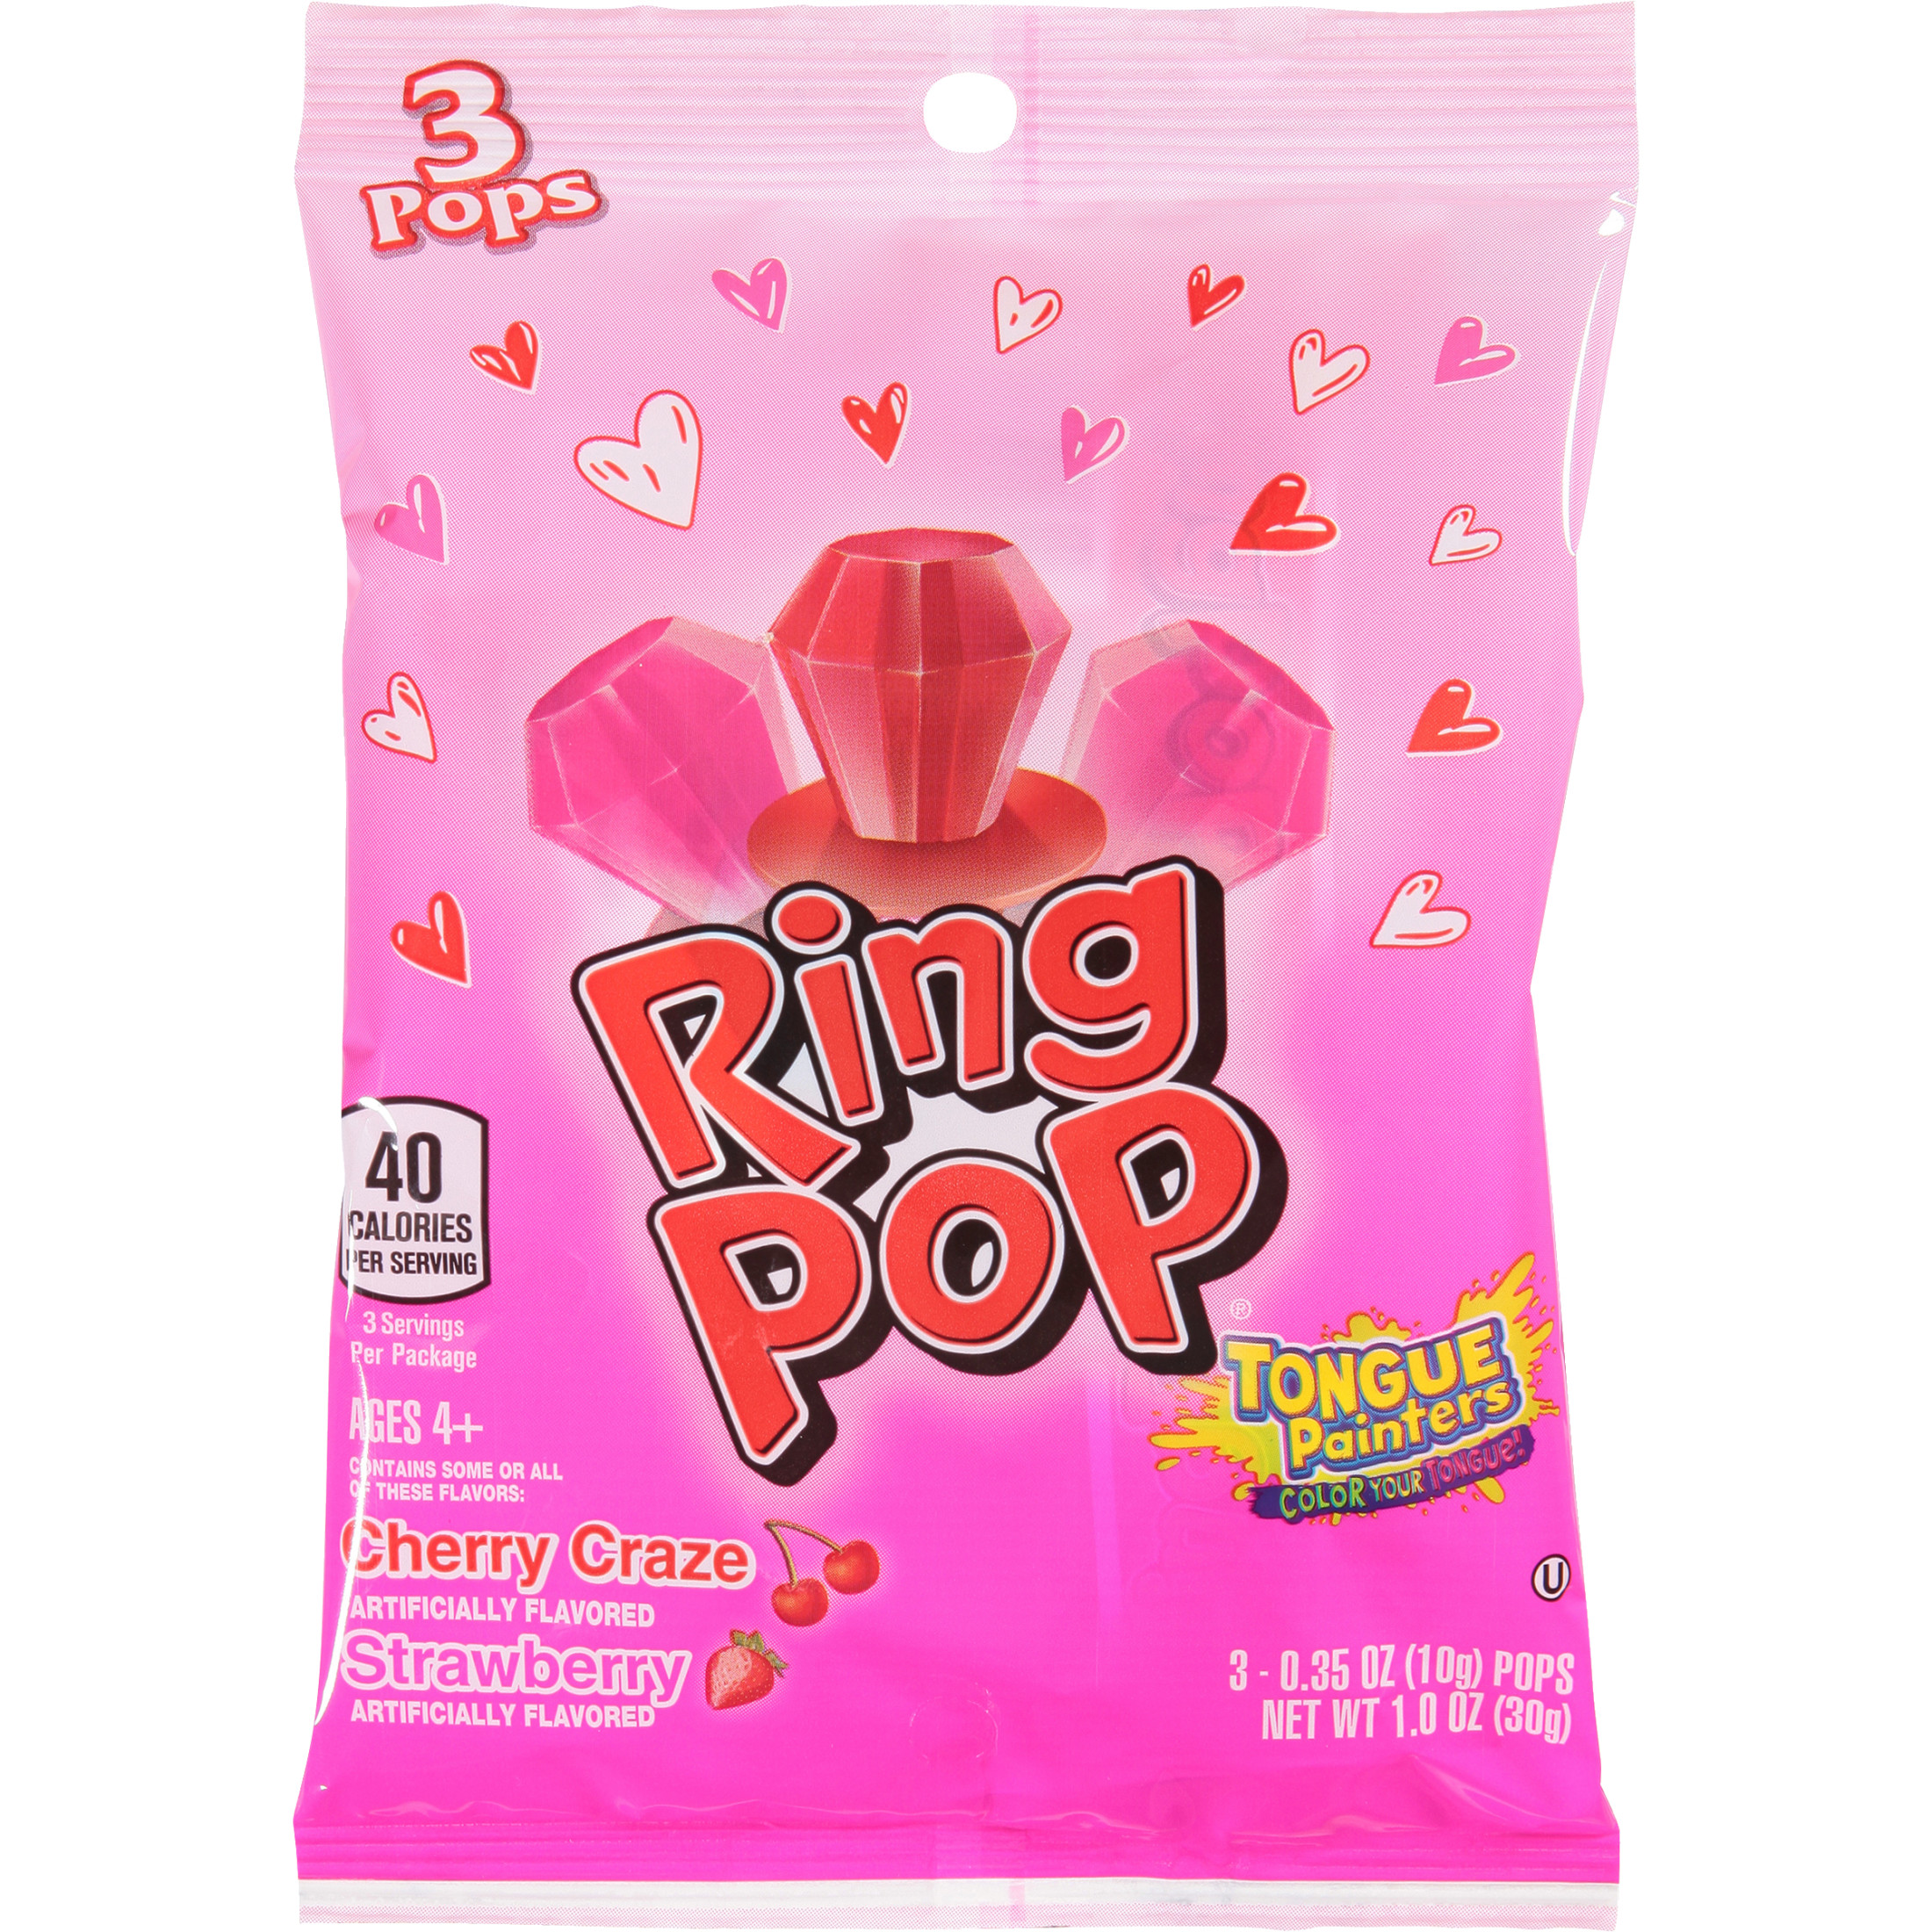 Ring Pop Valentine's Day Strawberry and Cherry Craze Lollipop Classroom Exchange Card (package), 3 Lollipops - image 1 of 8